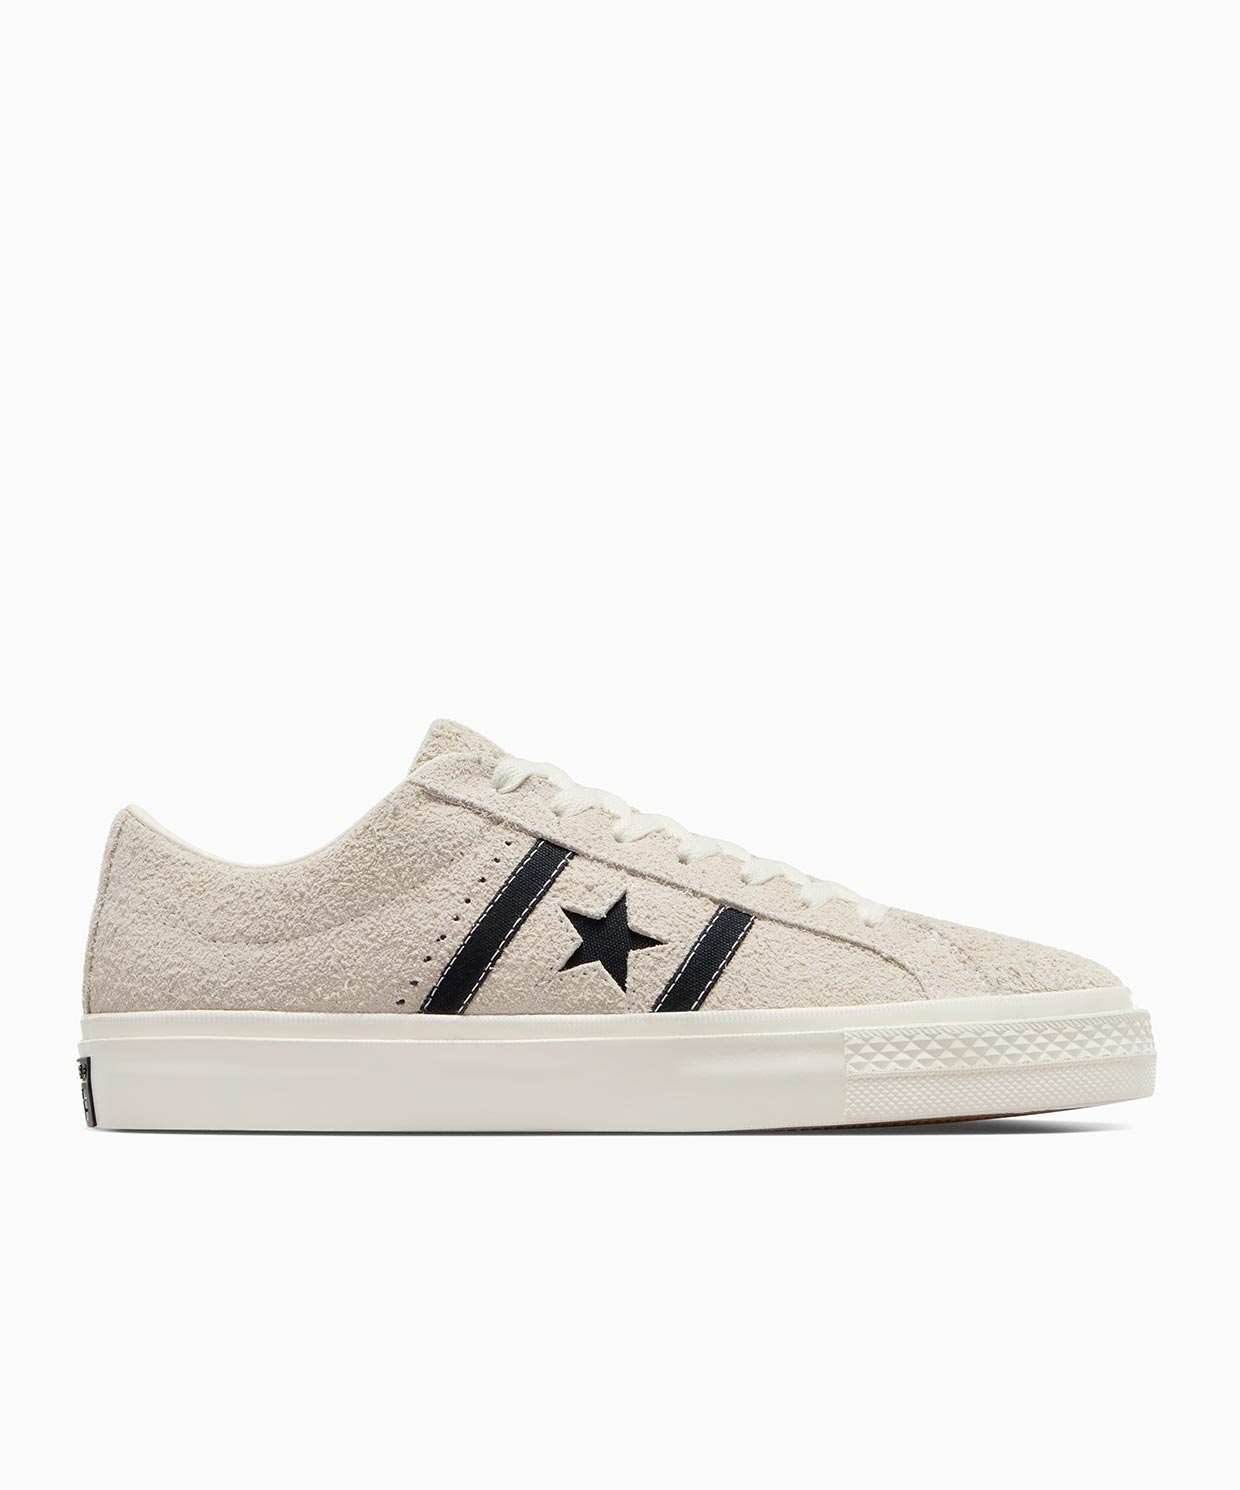 resm Converse One Star Academy Pro Suede